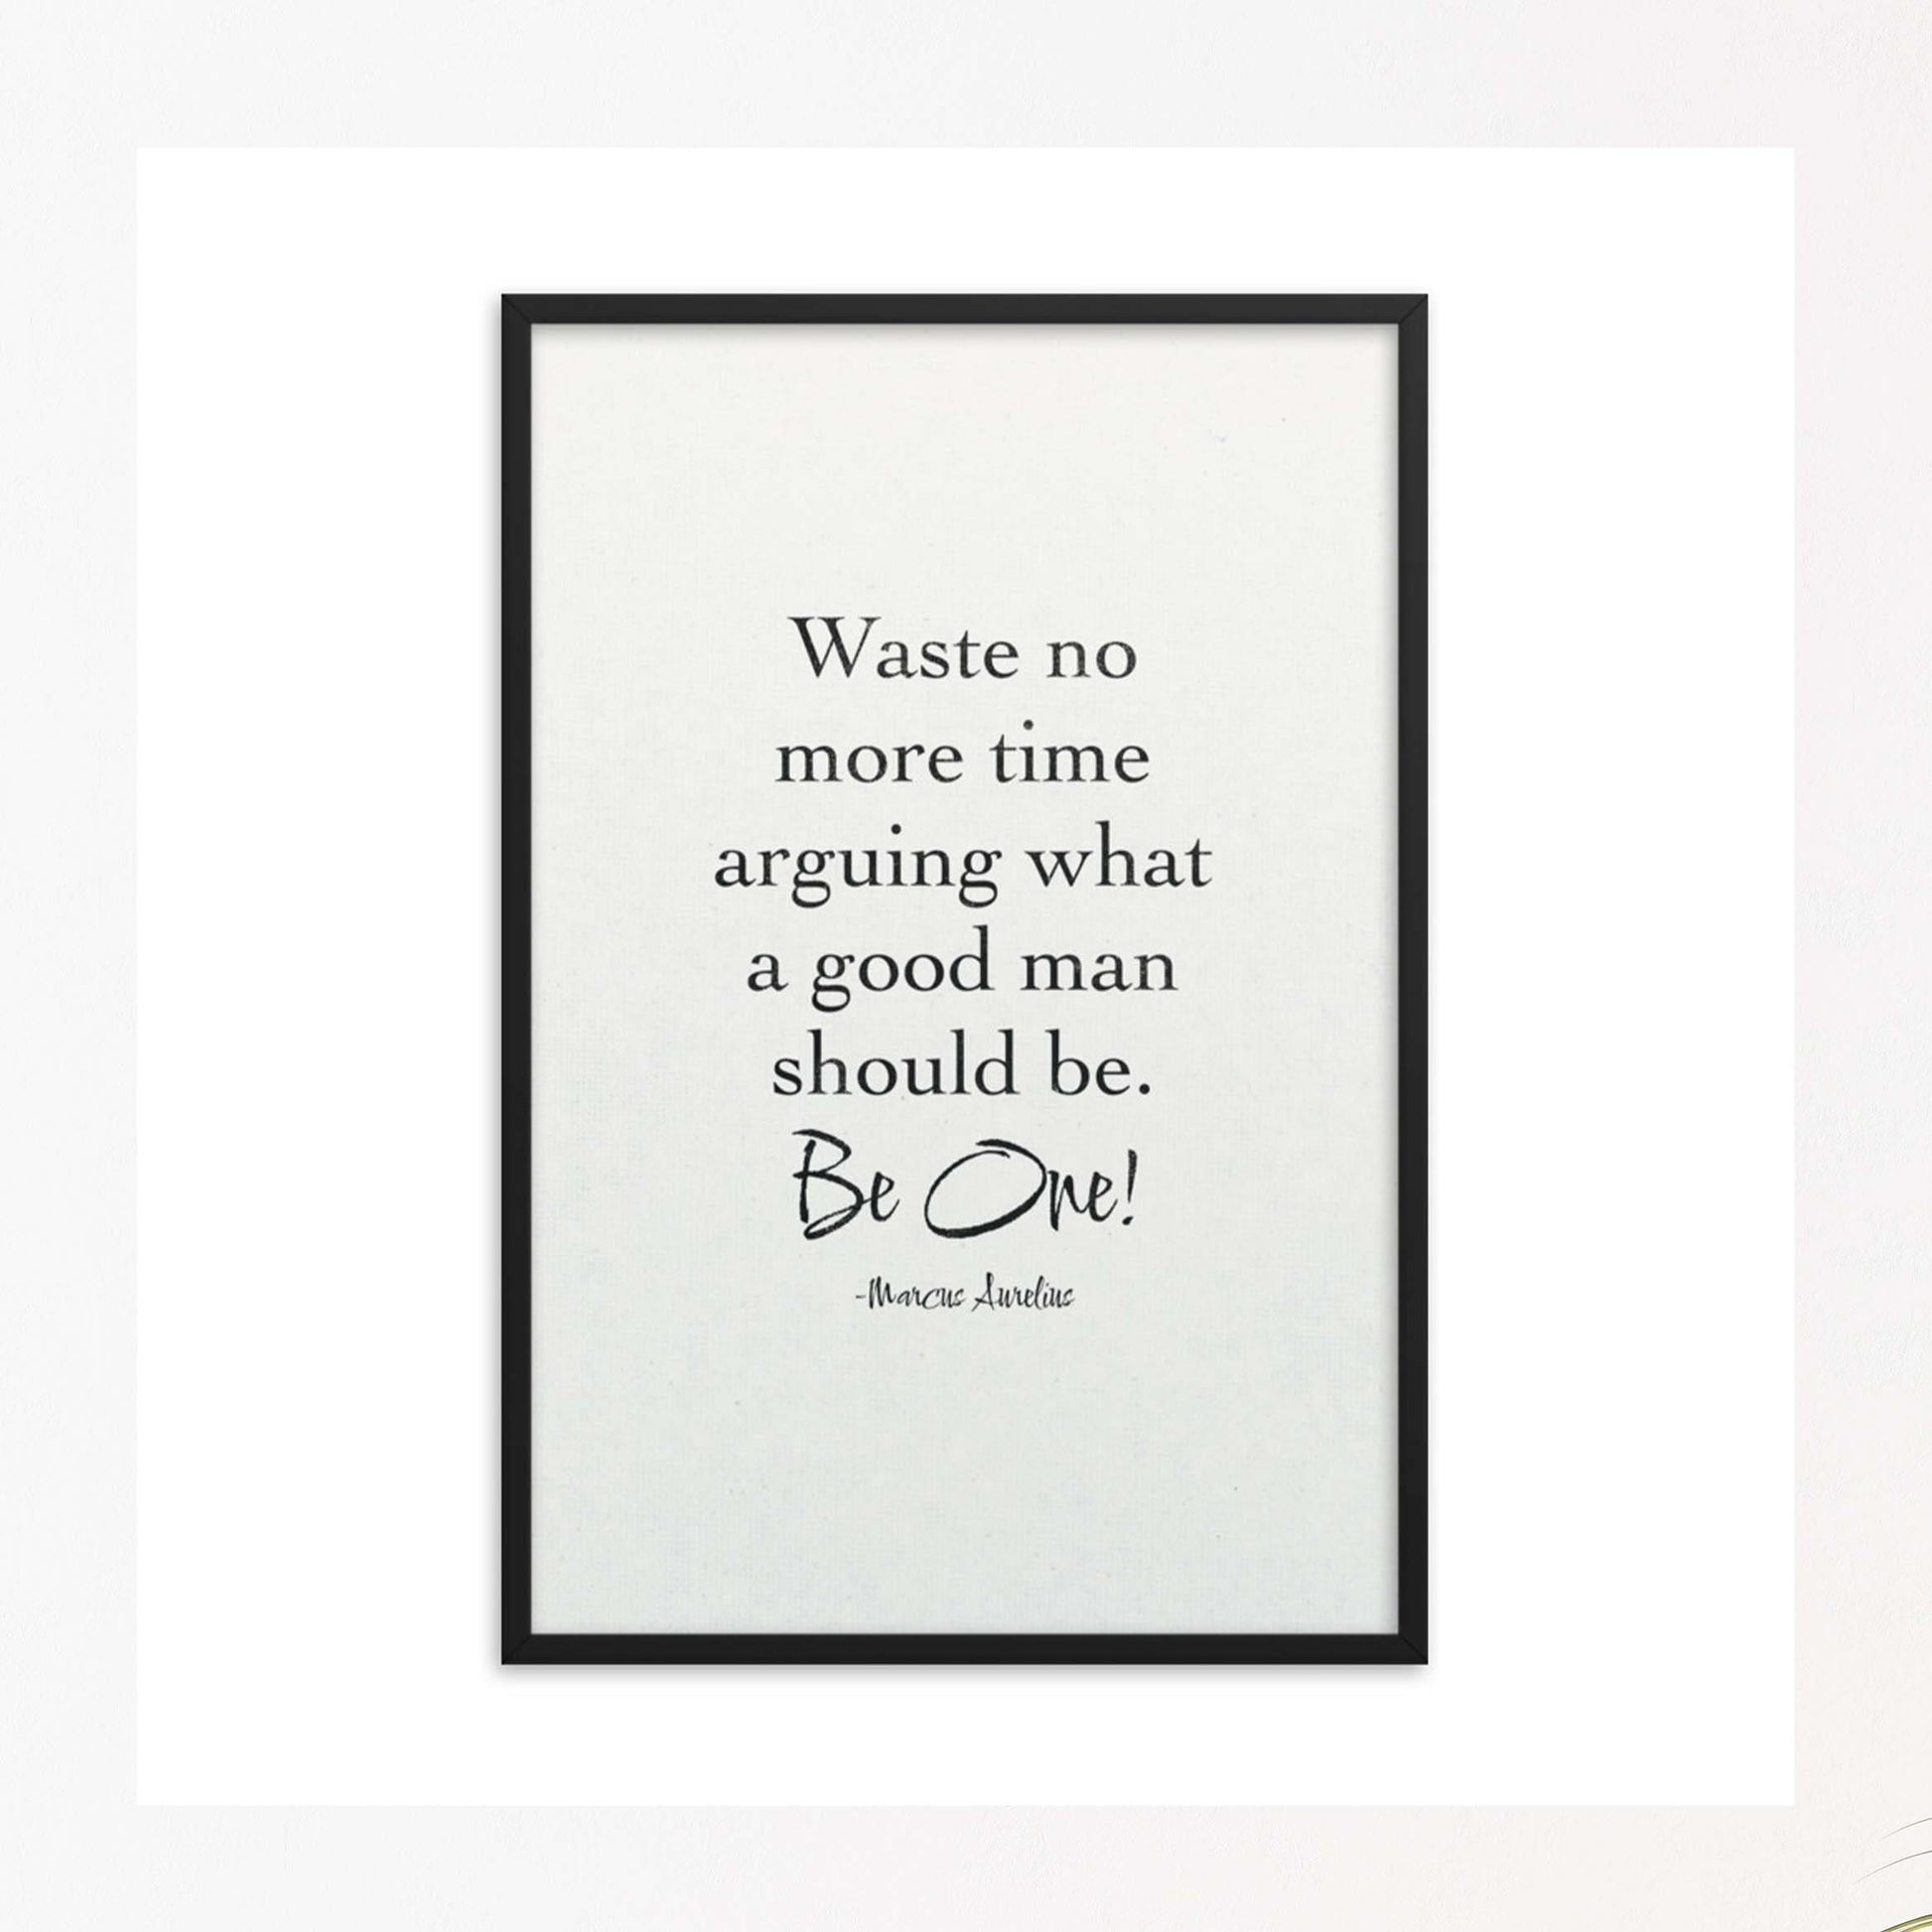 Waste no more time arguing what a good man should be. Be One! by marcus aurelius quote black on white poster in black frame.